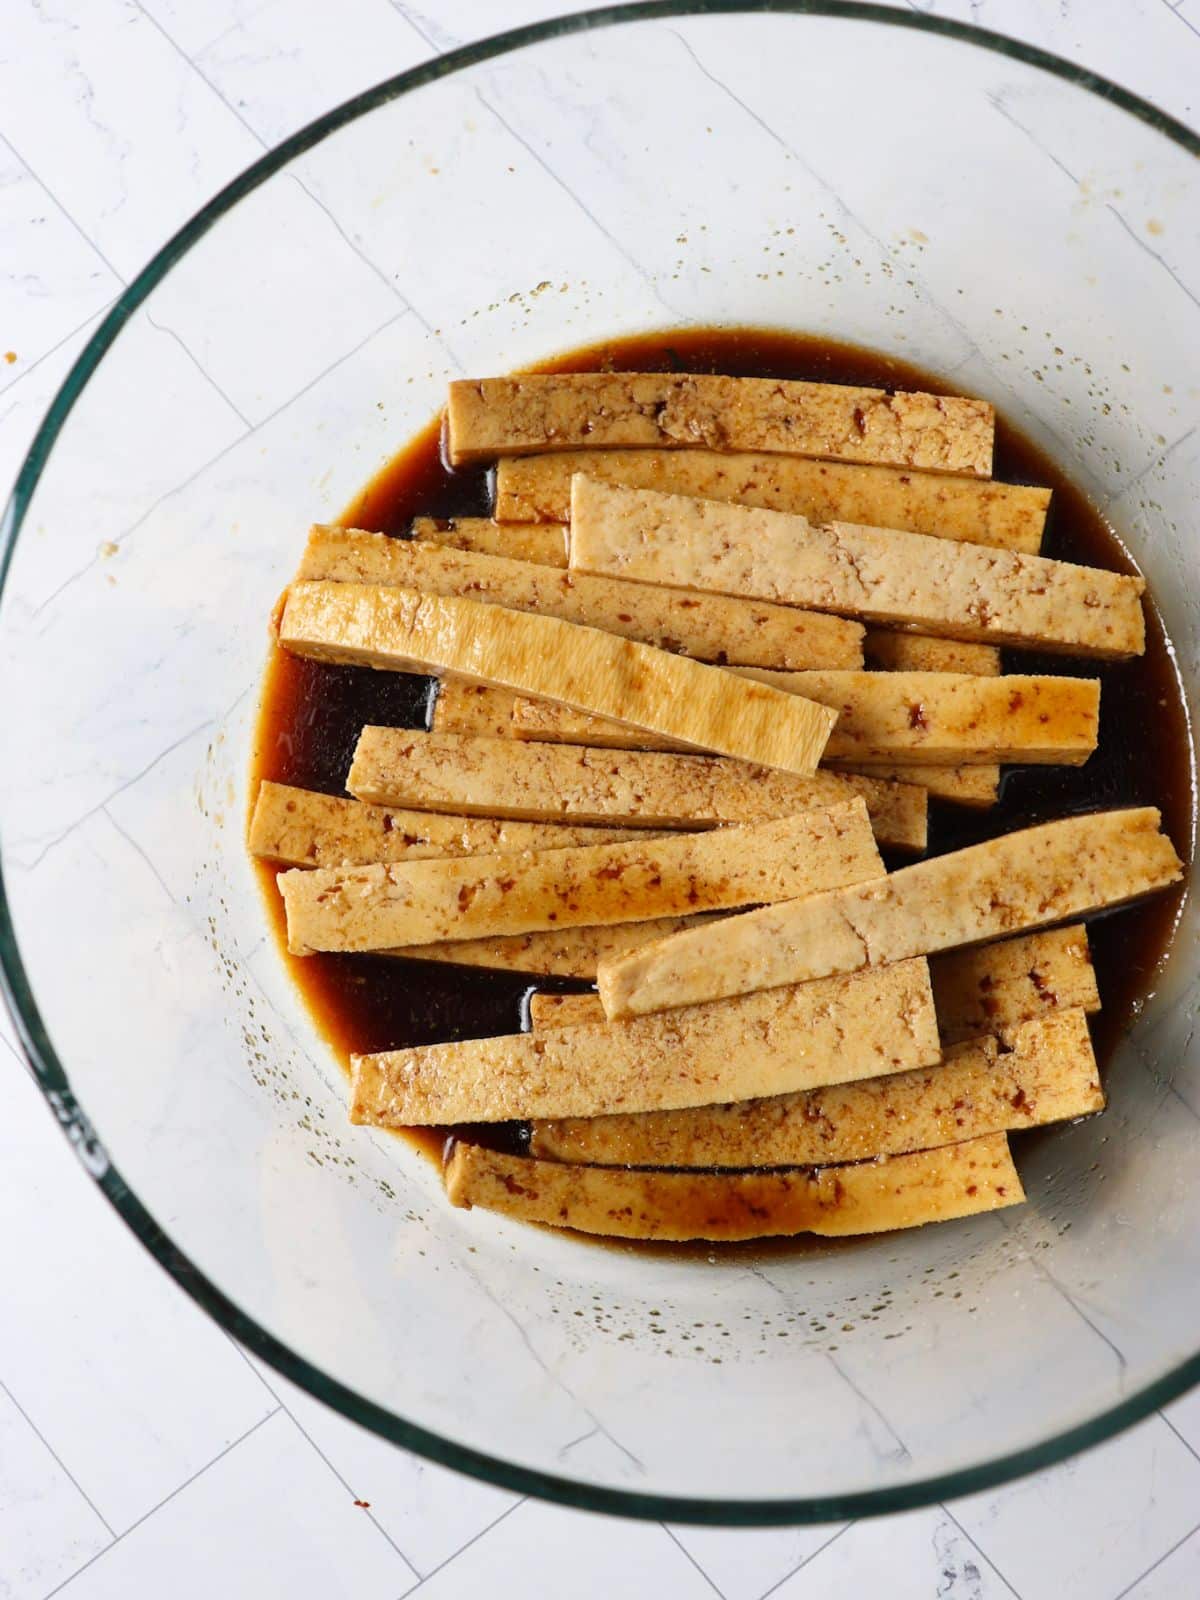 Tofu strips marinating in a soy sauce based marinade.